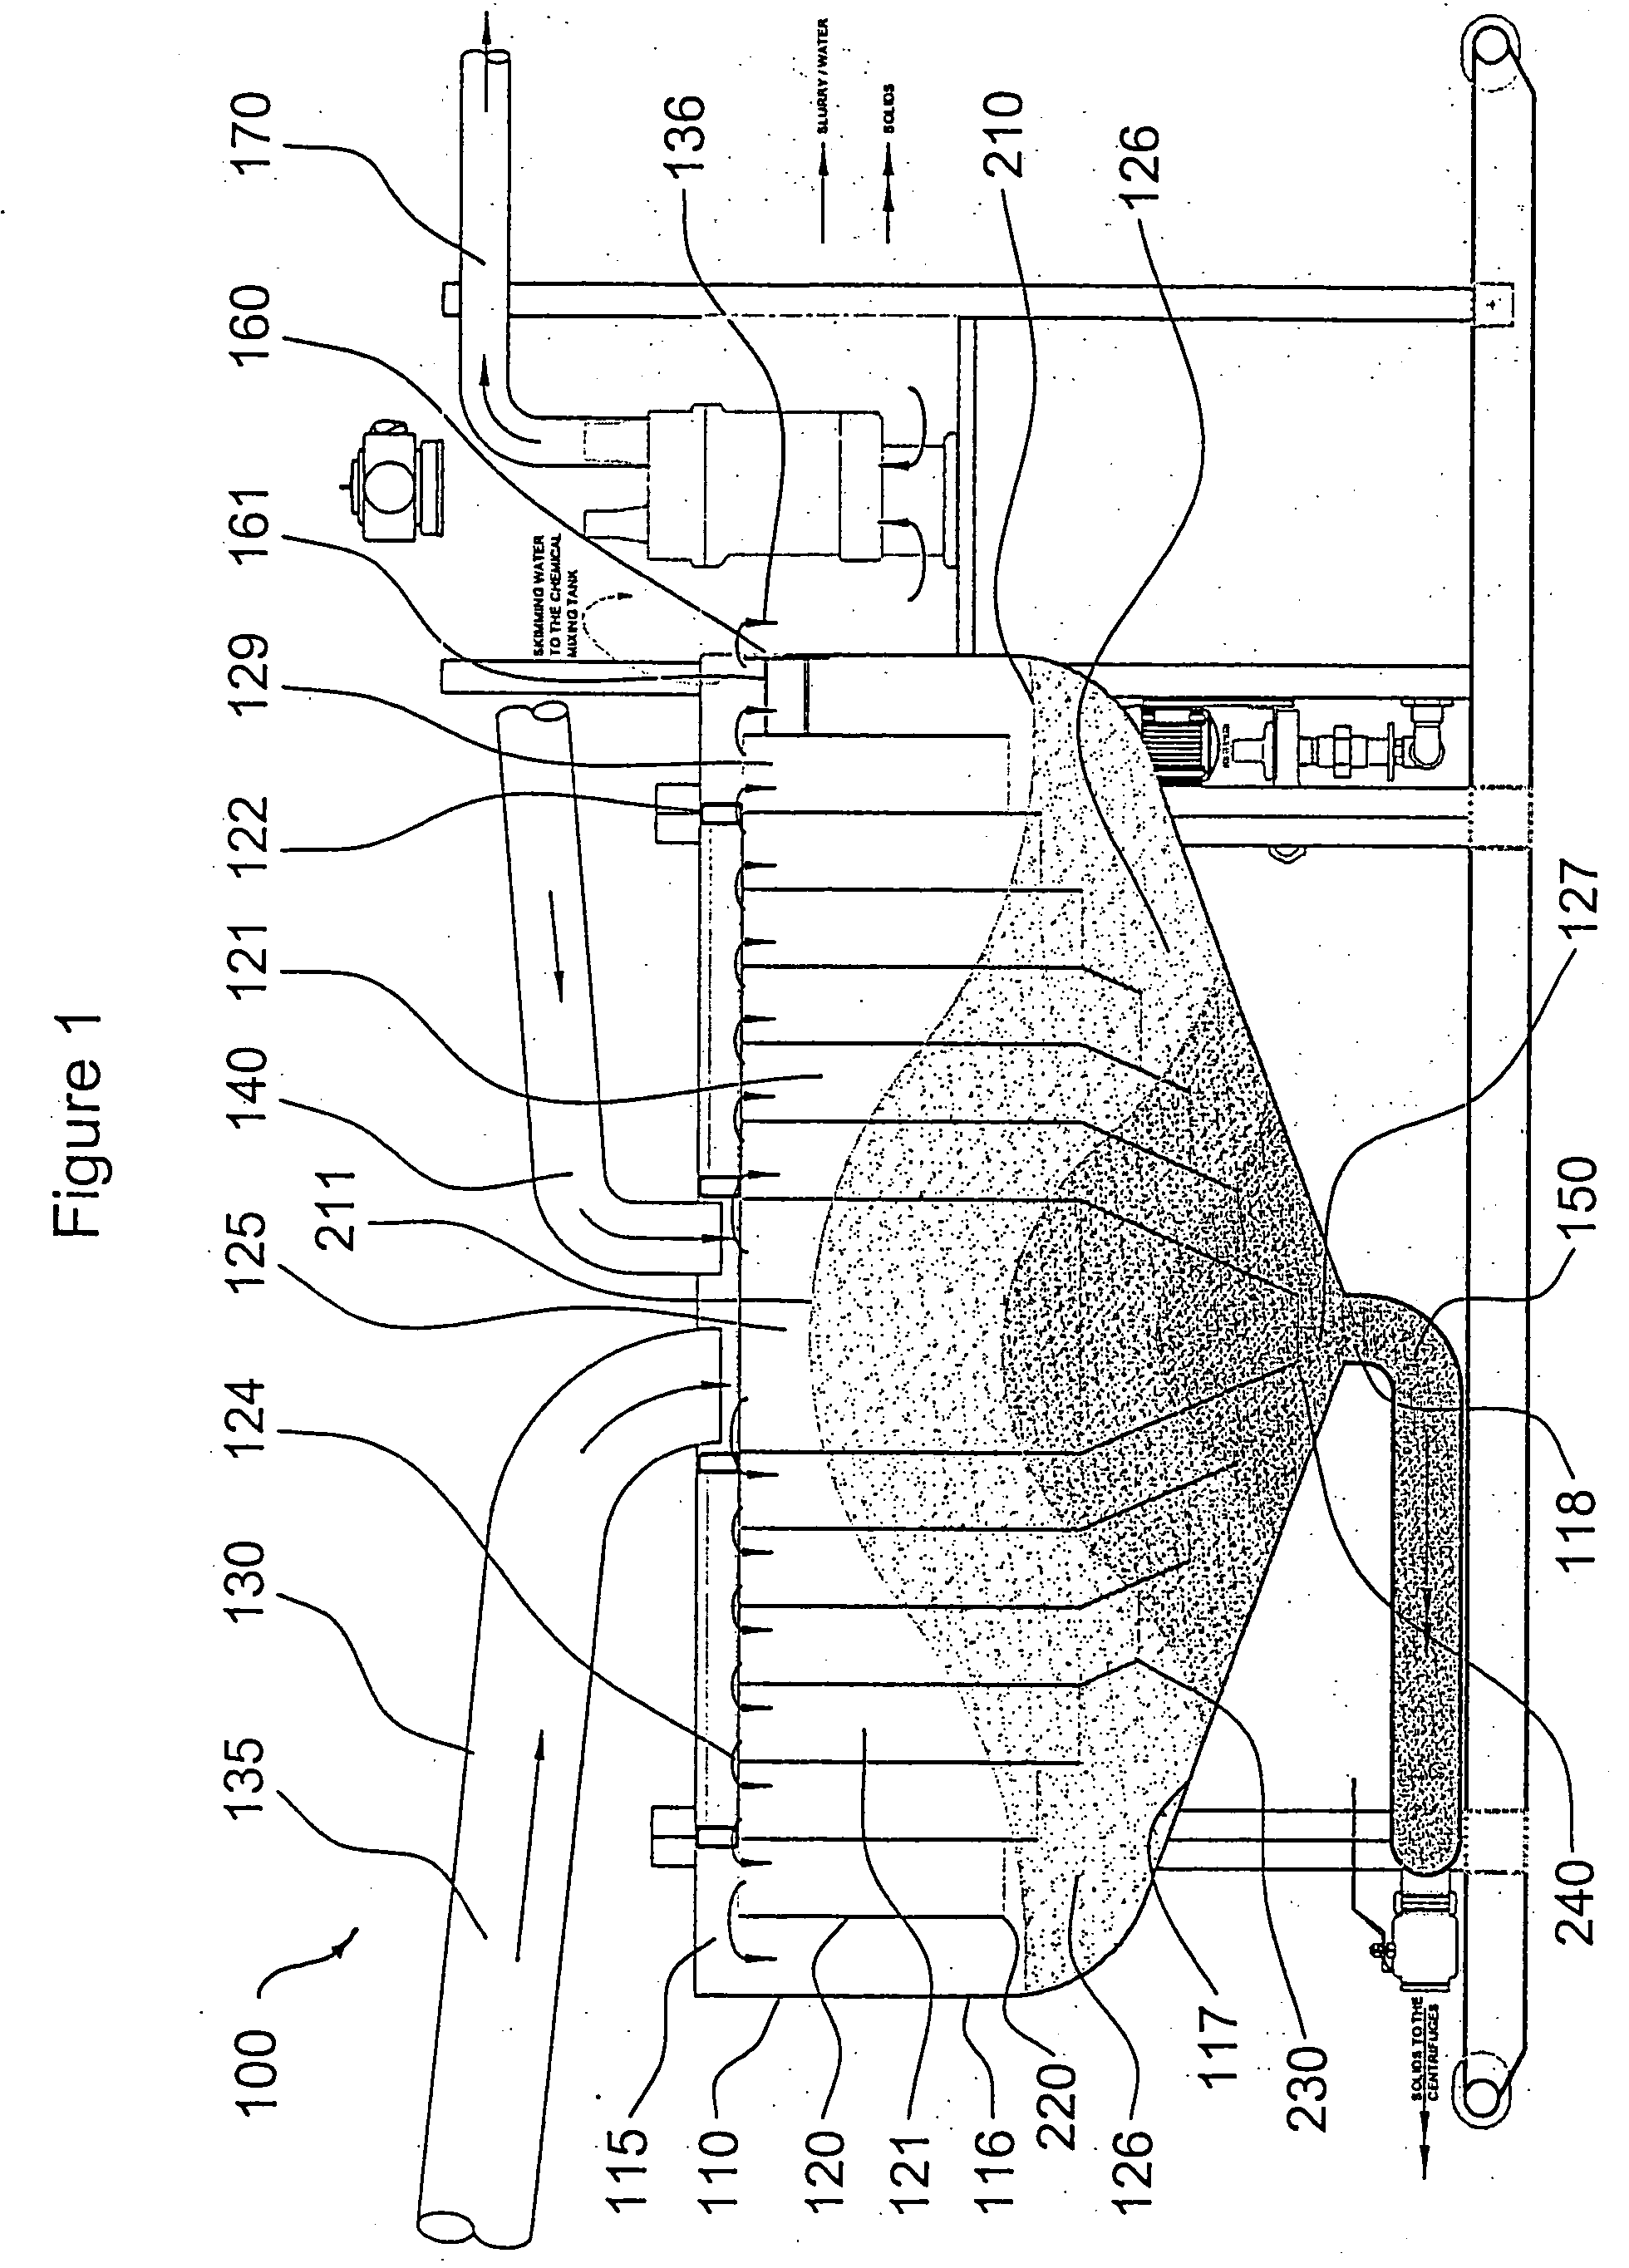 Method, system and apparatus for separating solids from drilling slurry